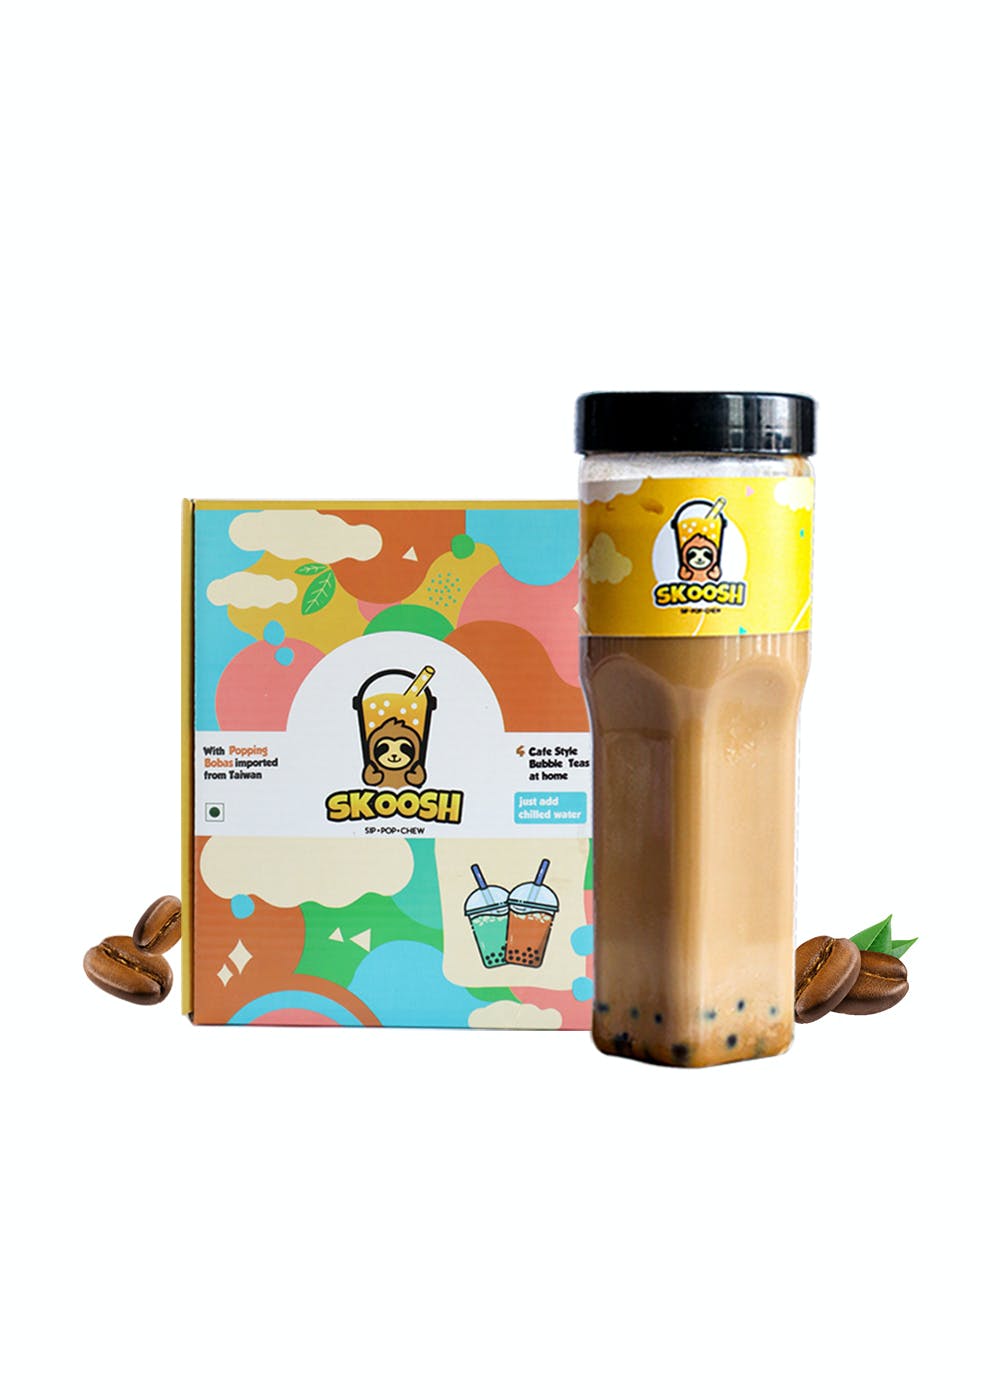 Premium Cold Coffe Kit with Popping Bobas - DIY Kit - Café-Style